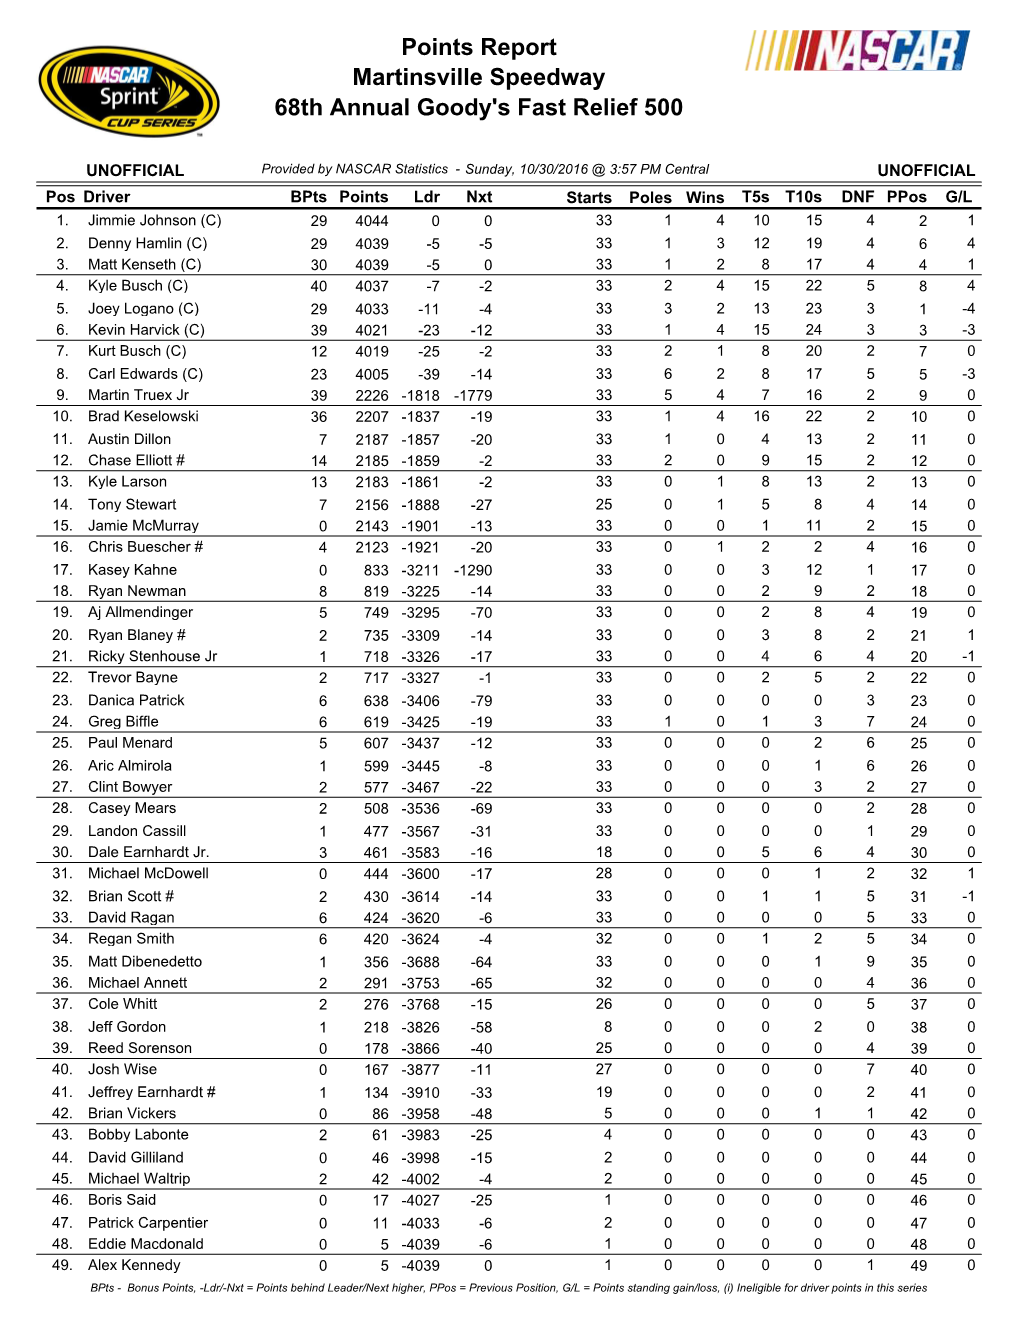 Martinsville Speedway 68Th Annual Goody's Fast Relief 500 Points Report